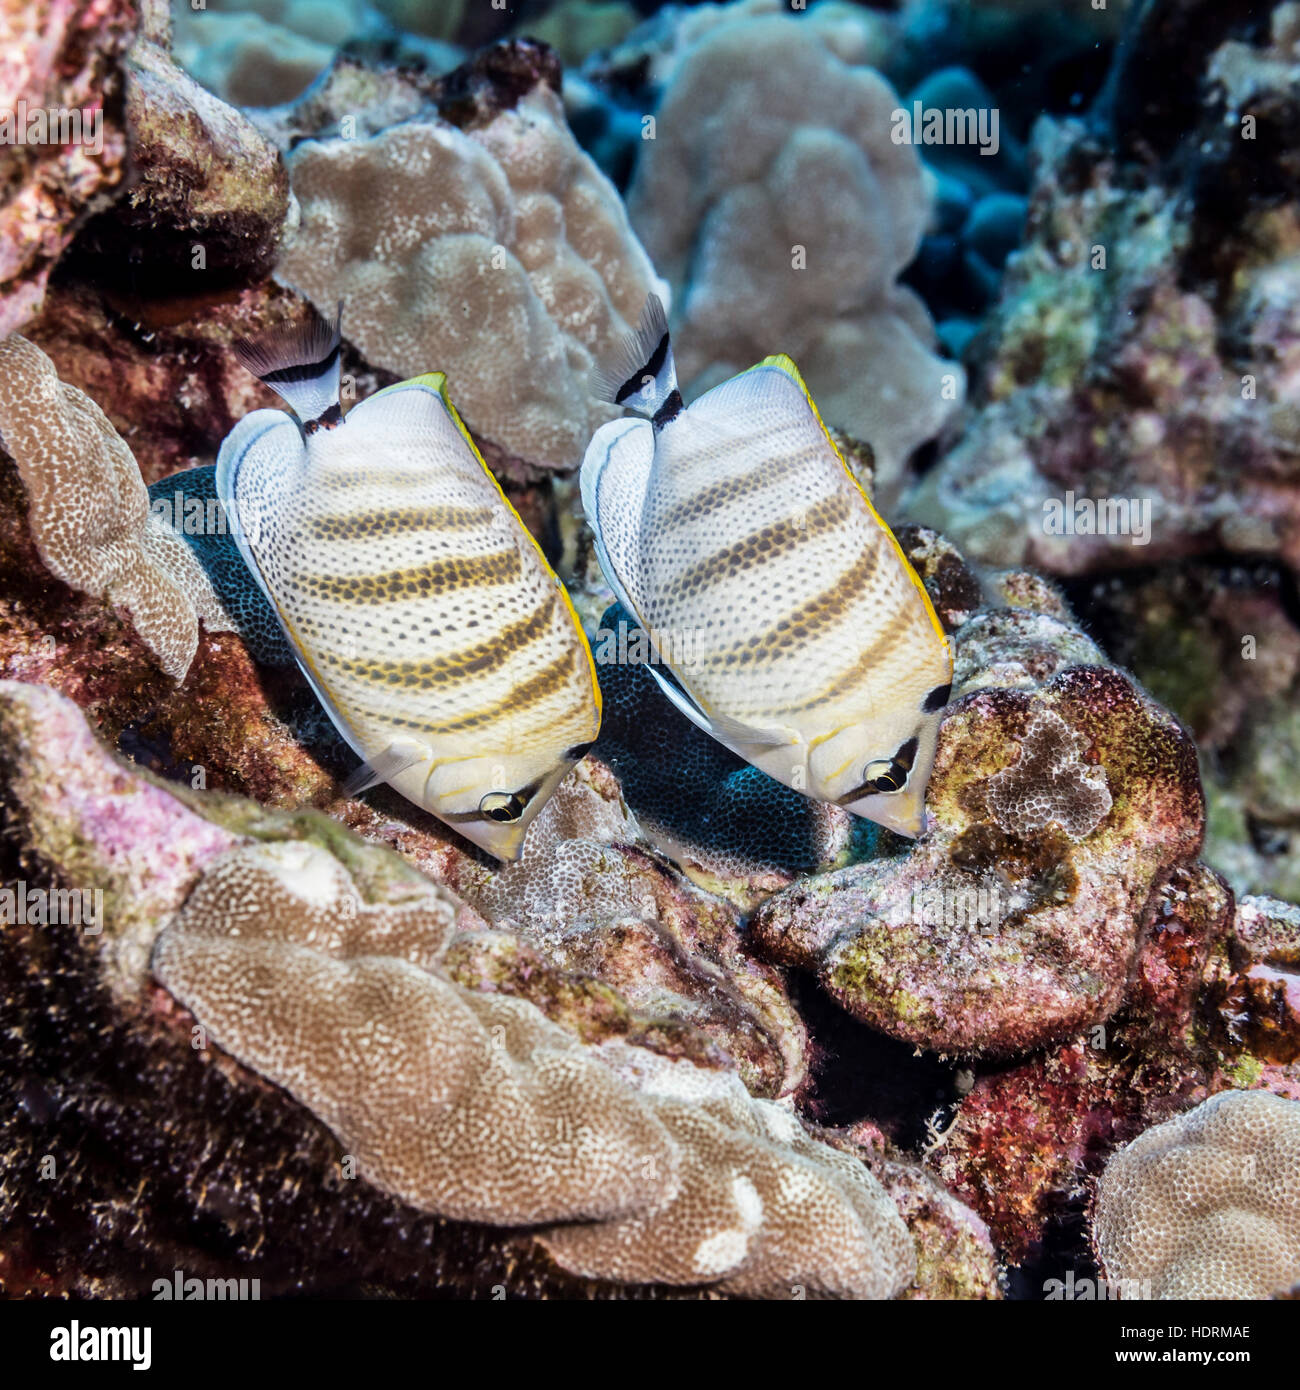 Multiband Butterflyfish (Chaetodon Multicinlus), A Hawaiian Endemic Fish Species, Pair Feeding On Lobe Coral (Porites Lobata) Photographed While Sc... Stock Photo